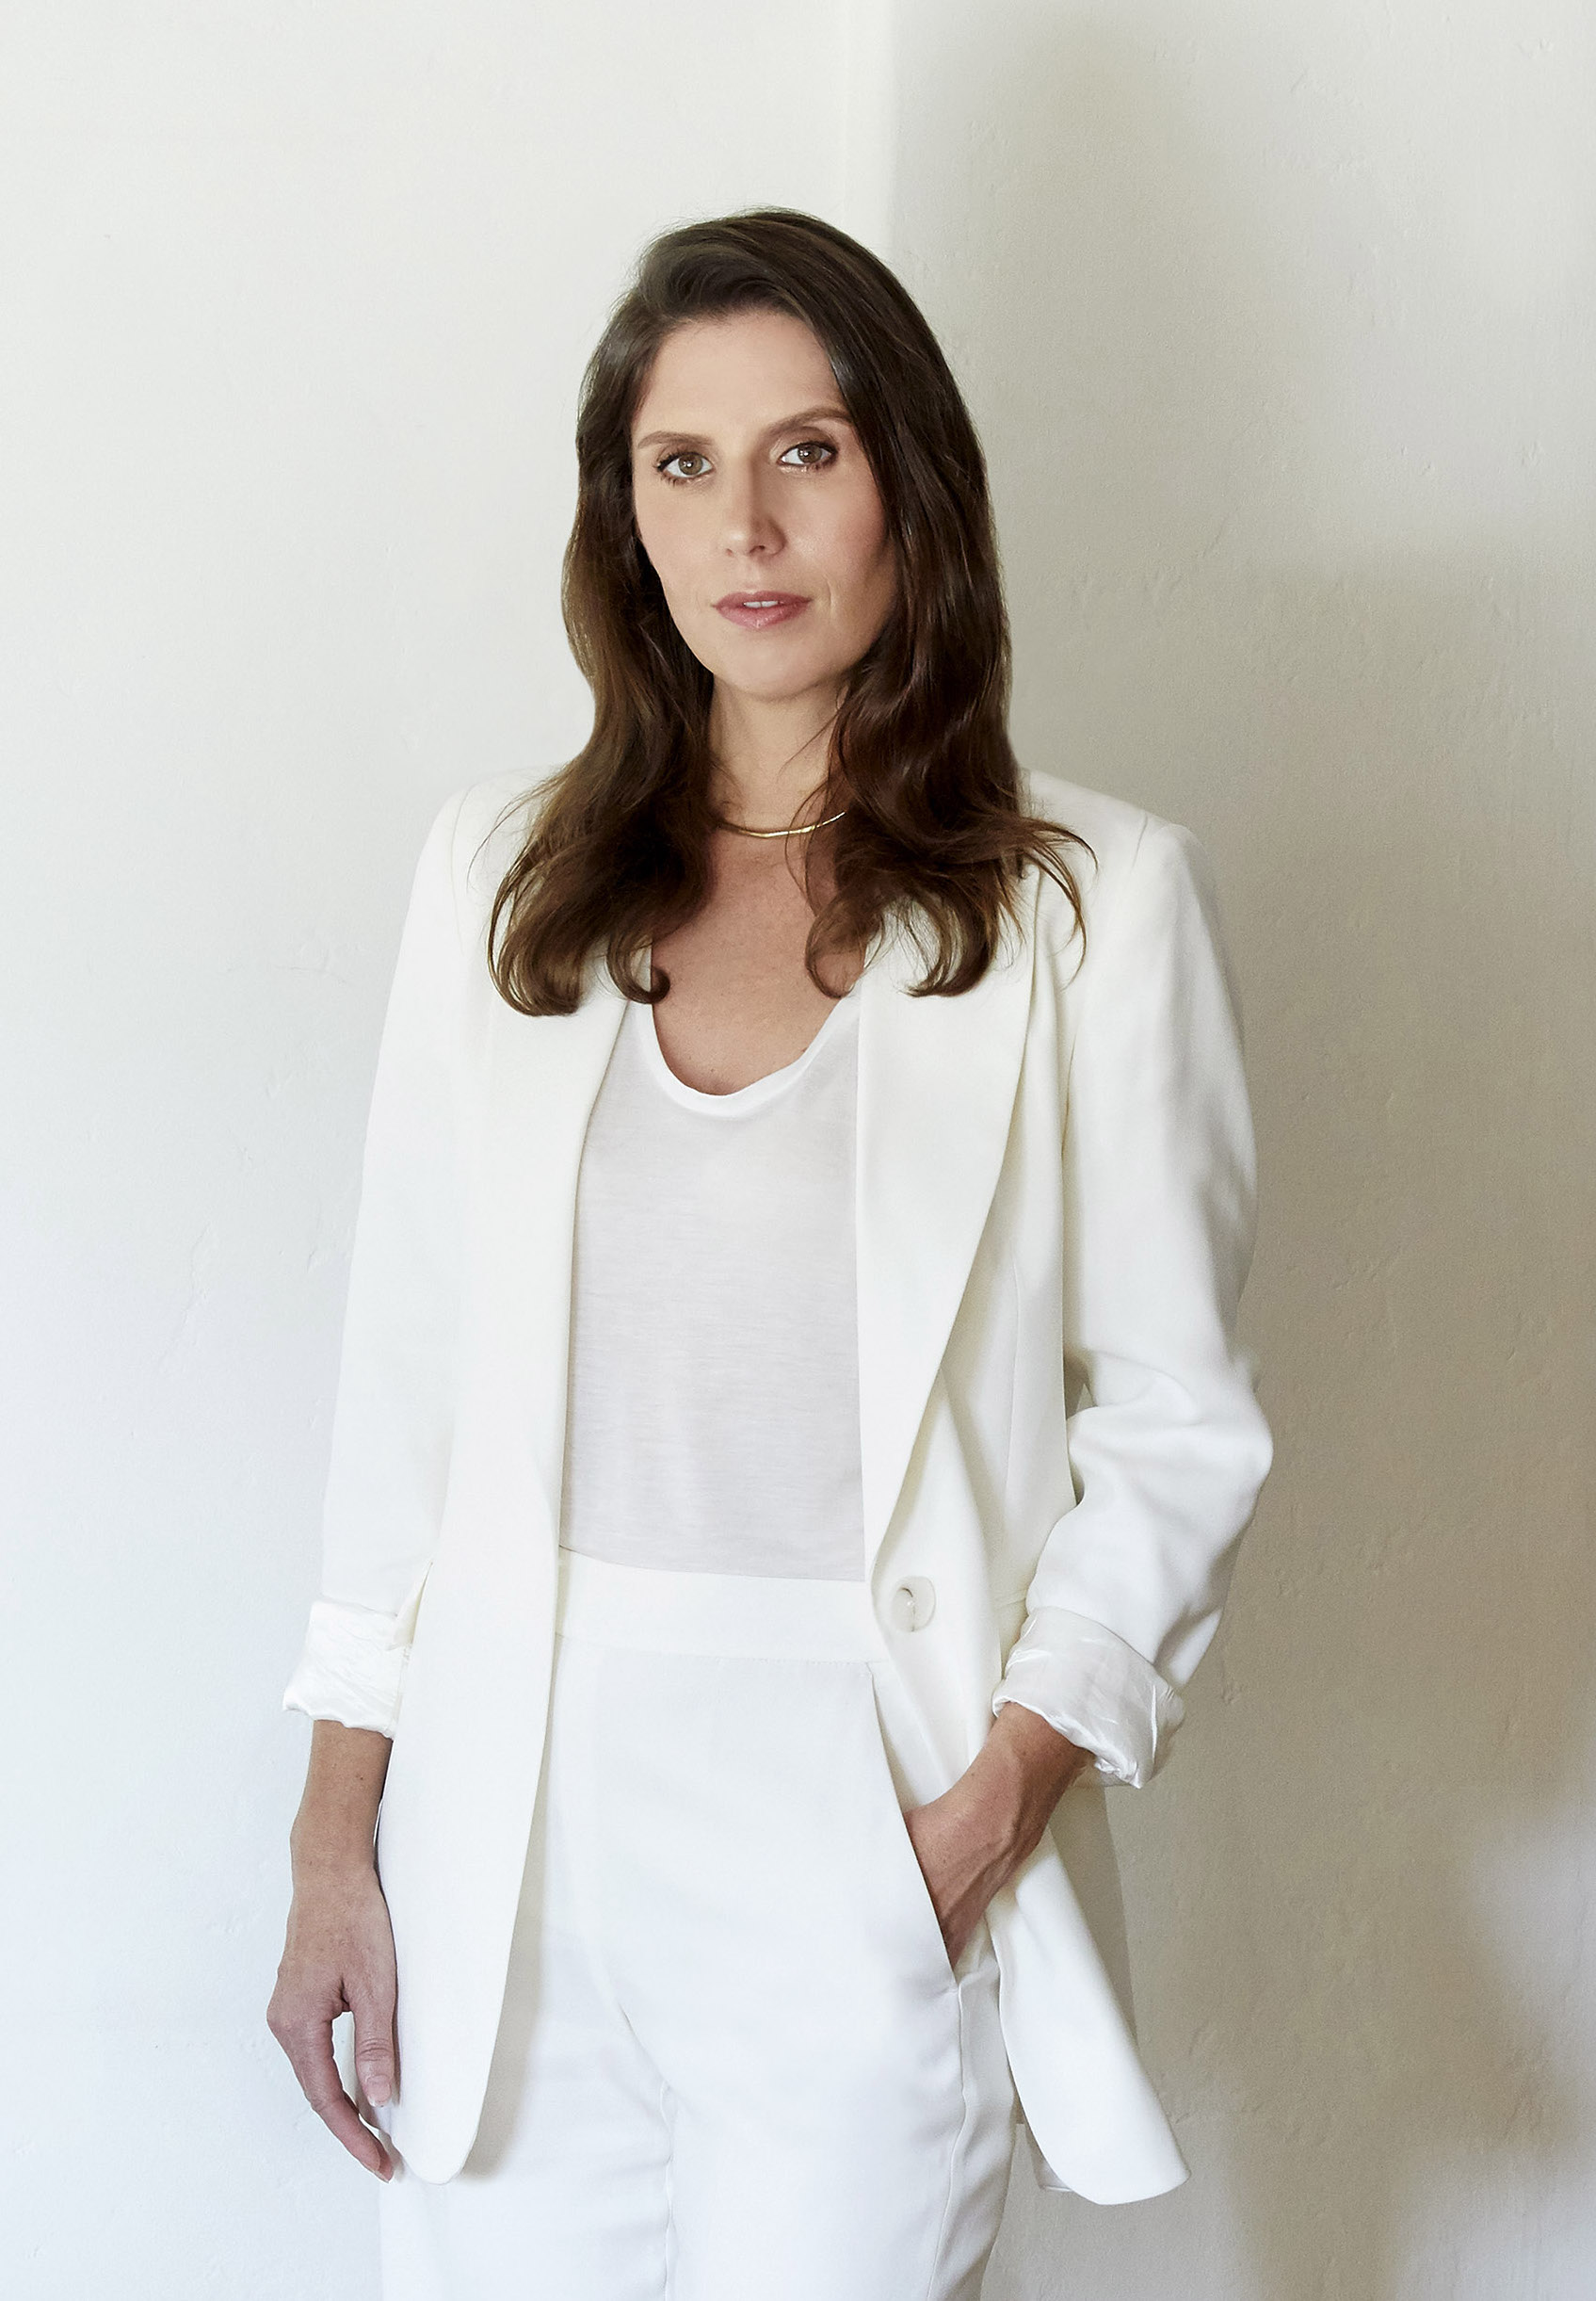 image of interior designer Elizabeth Sims, a woman wearing all white standing in front of white wall with long dark hair